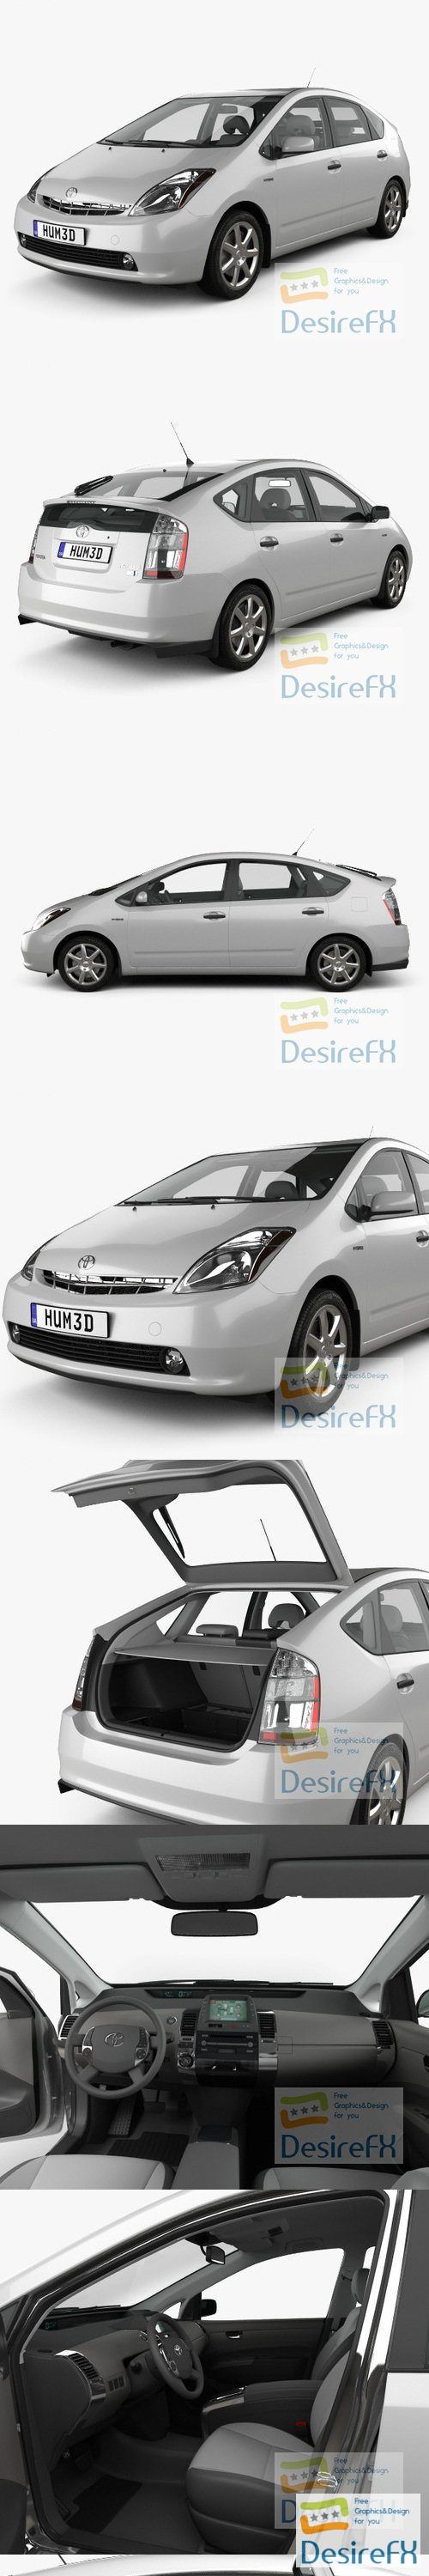 Toyota Prius with HQ interior and engine 2003 3D Model